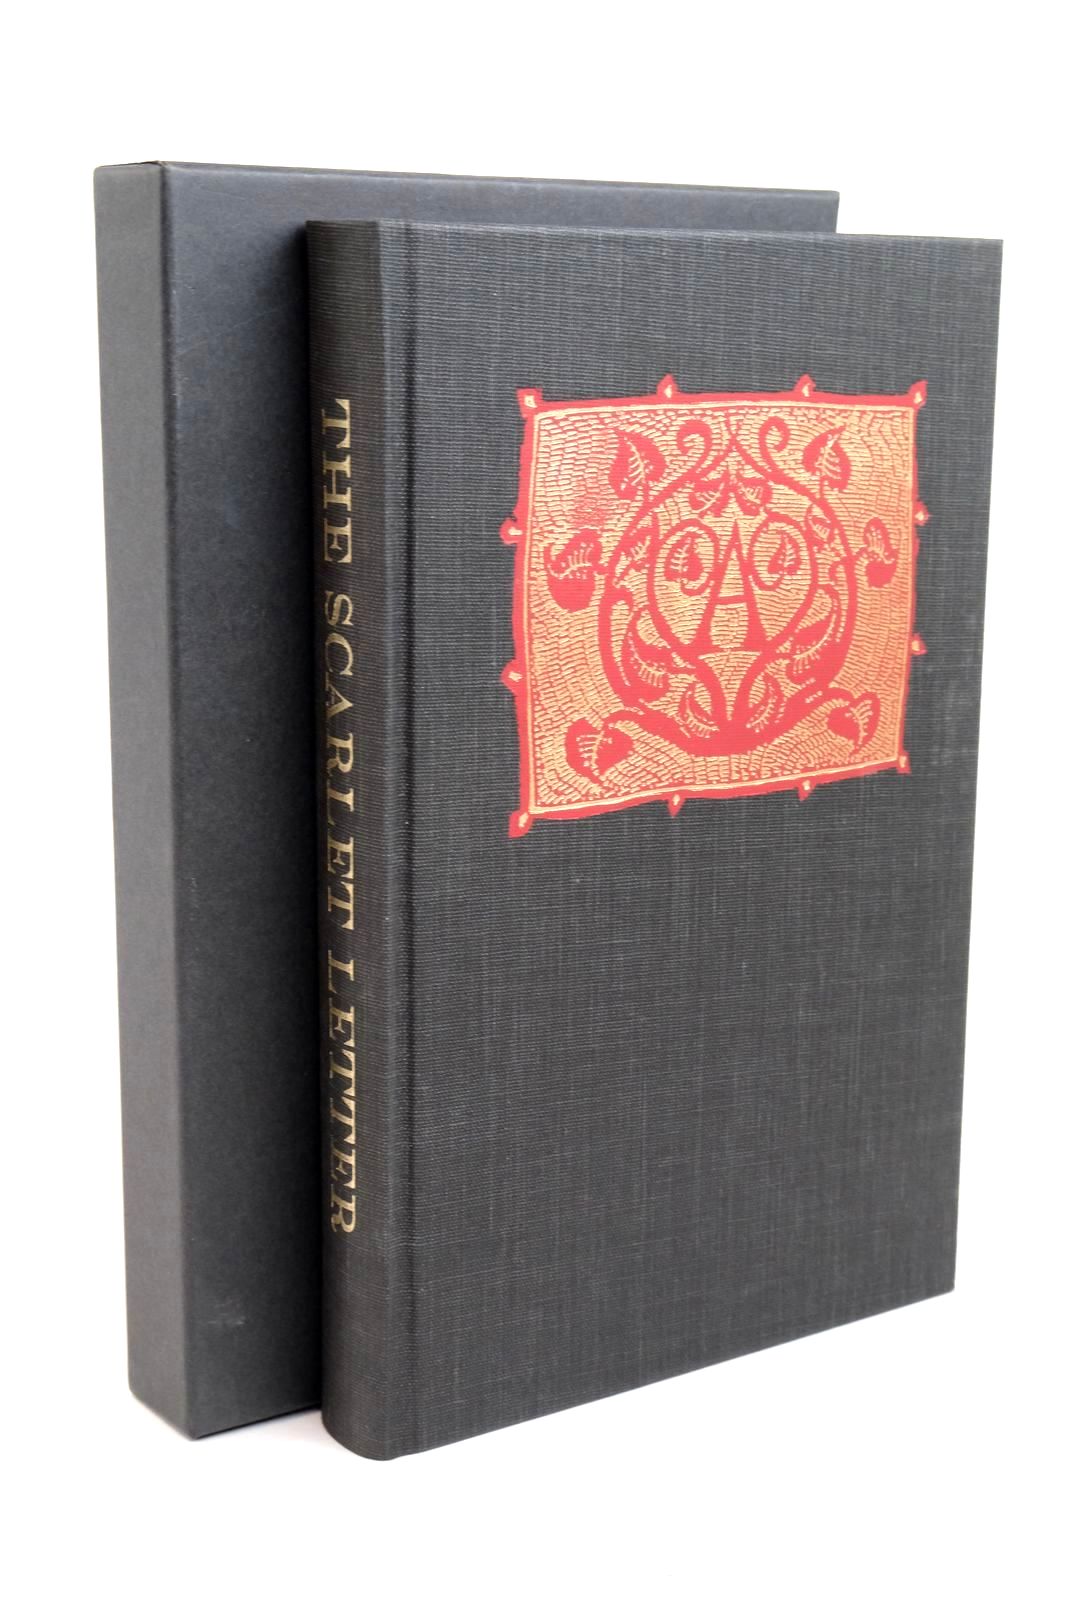 Photo of THE SCARLET LETTER written by Hawthorne, Nathaniel published by Folio Society (STOCK CODE: 1322167)  for sale by Stella & Rose's Books